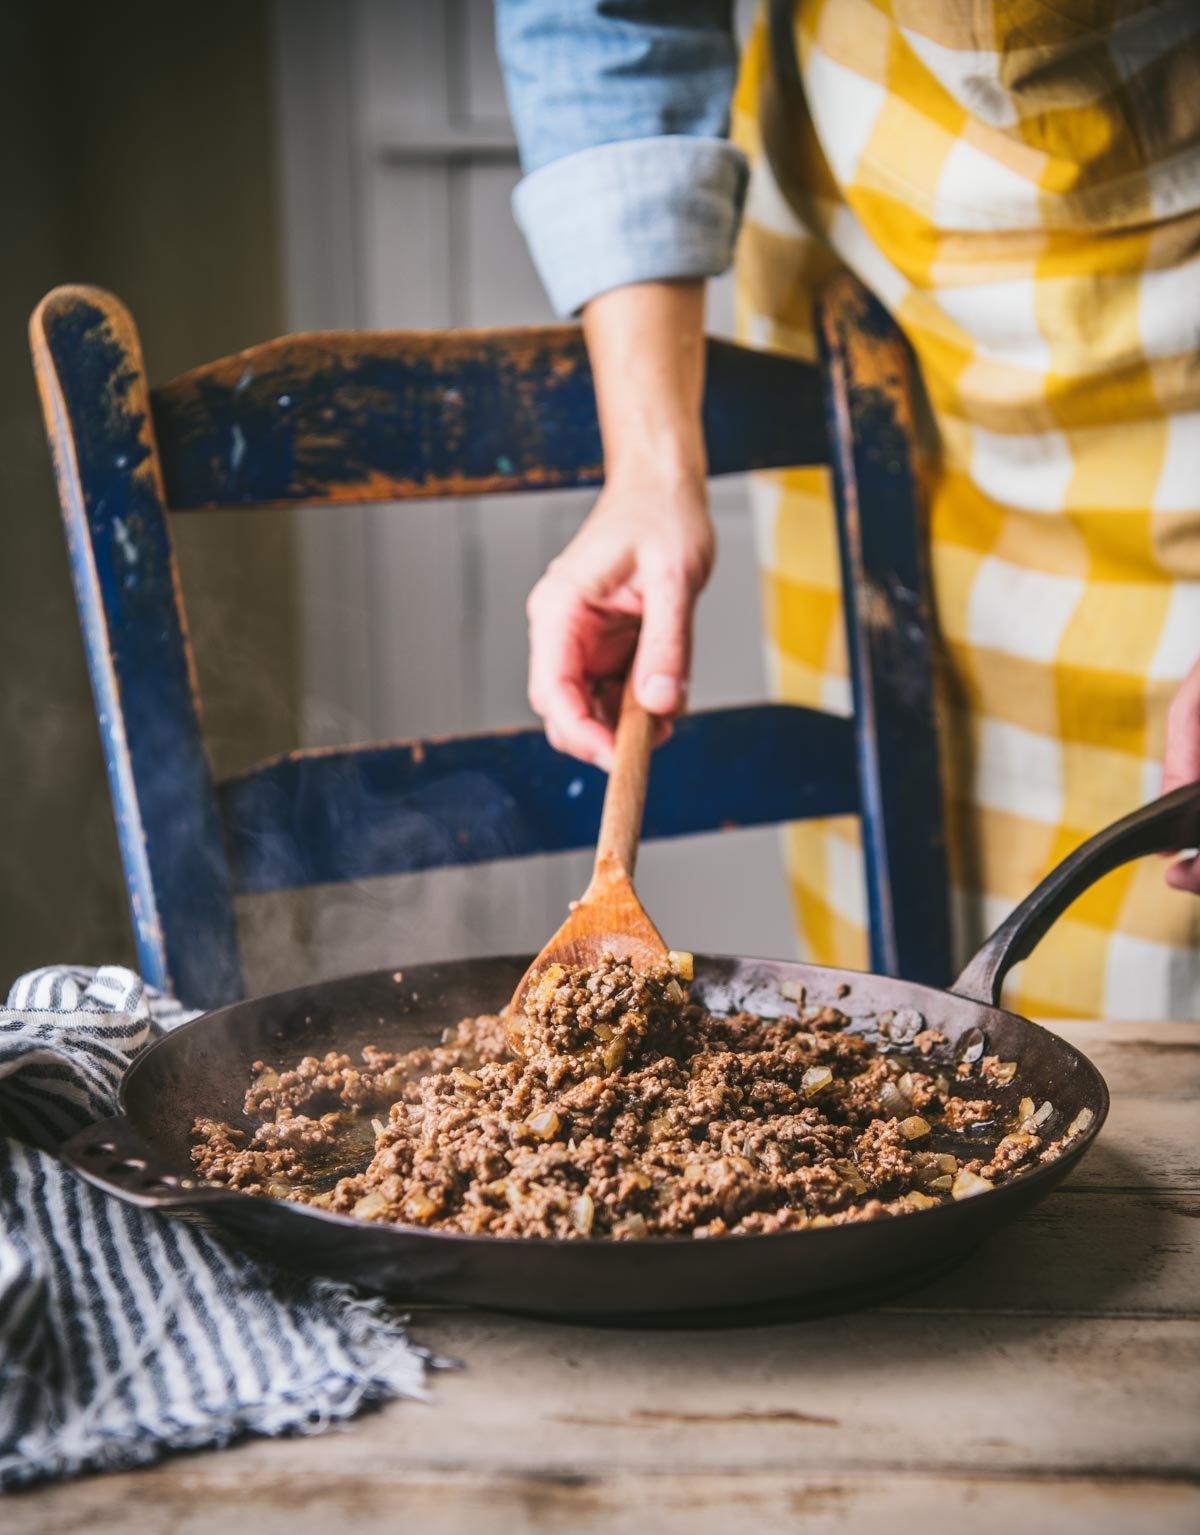 Cooking taco meat in a skillet